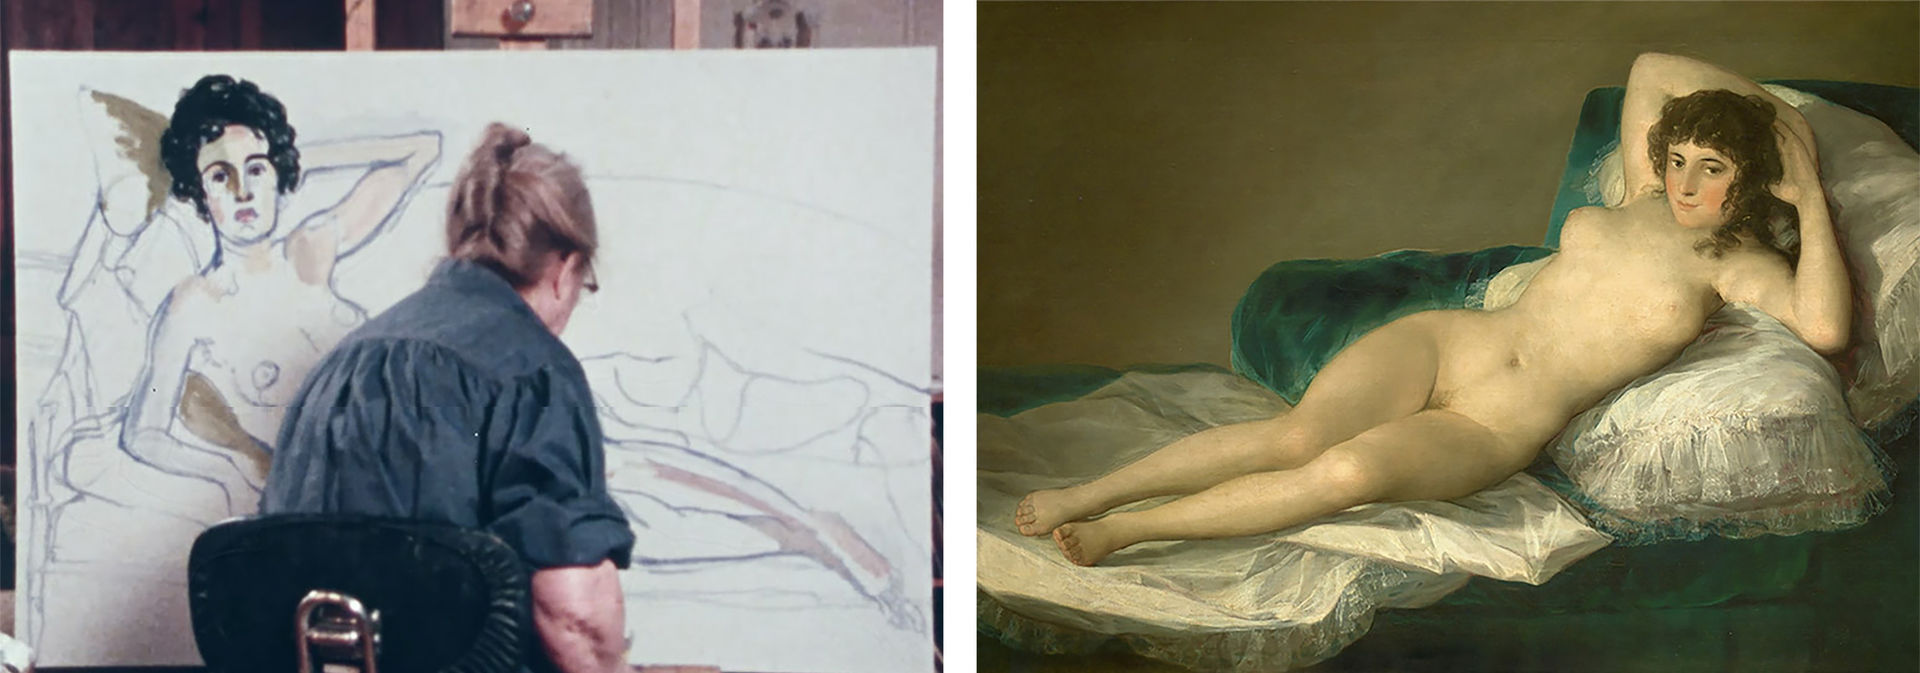 Left: Alice Neel works on a canvas of a woman reclining. Right: A portrait of a nude woman reclining on a sofa